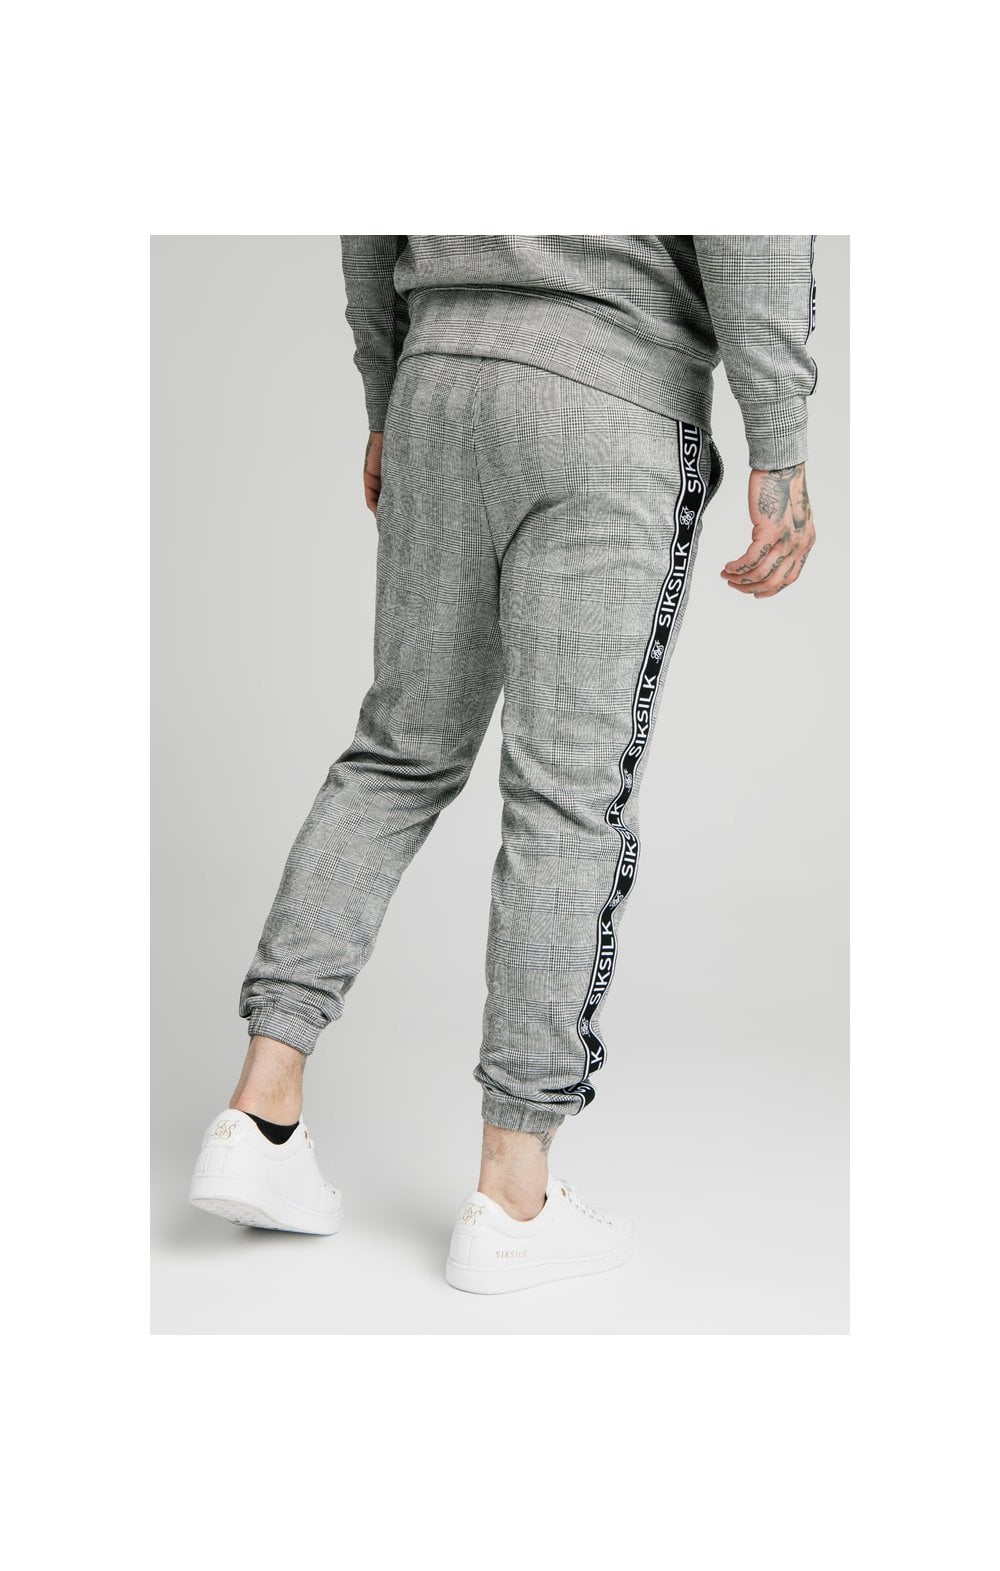 SikSilk Dog Tooth Check Cuffed Pant - Black & White (2)